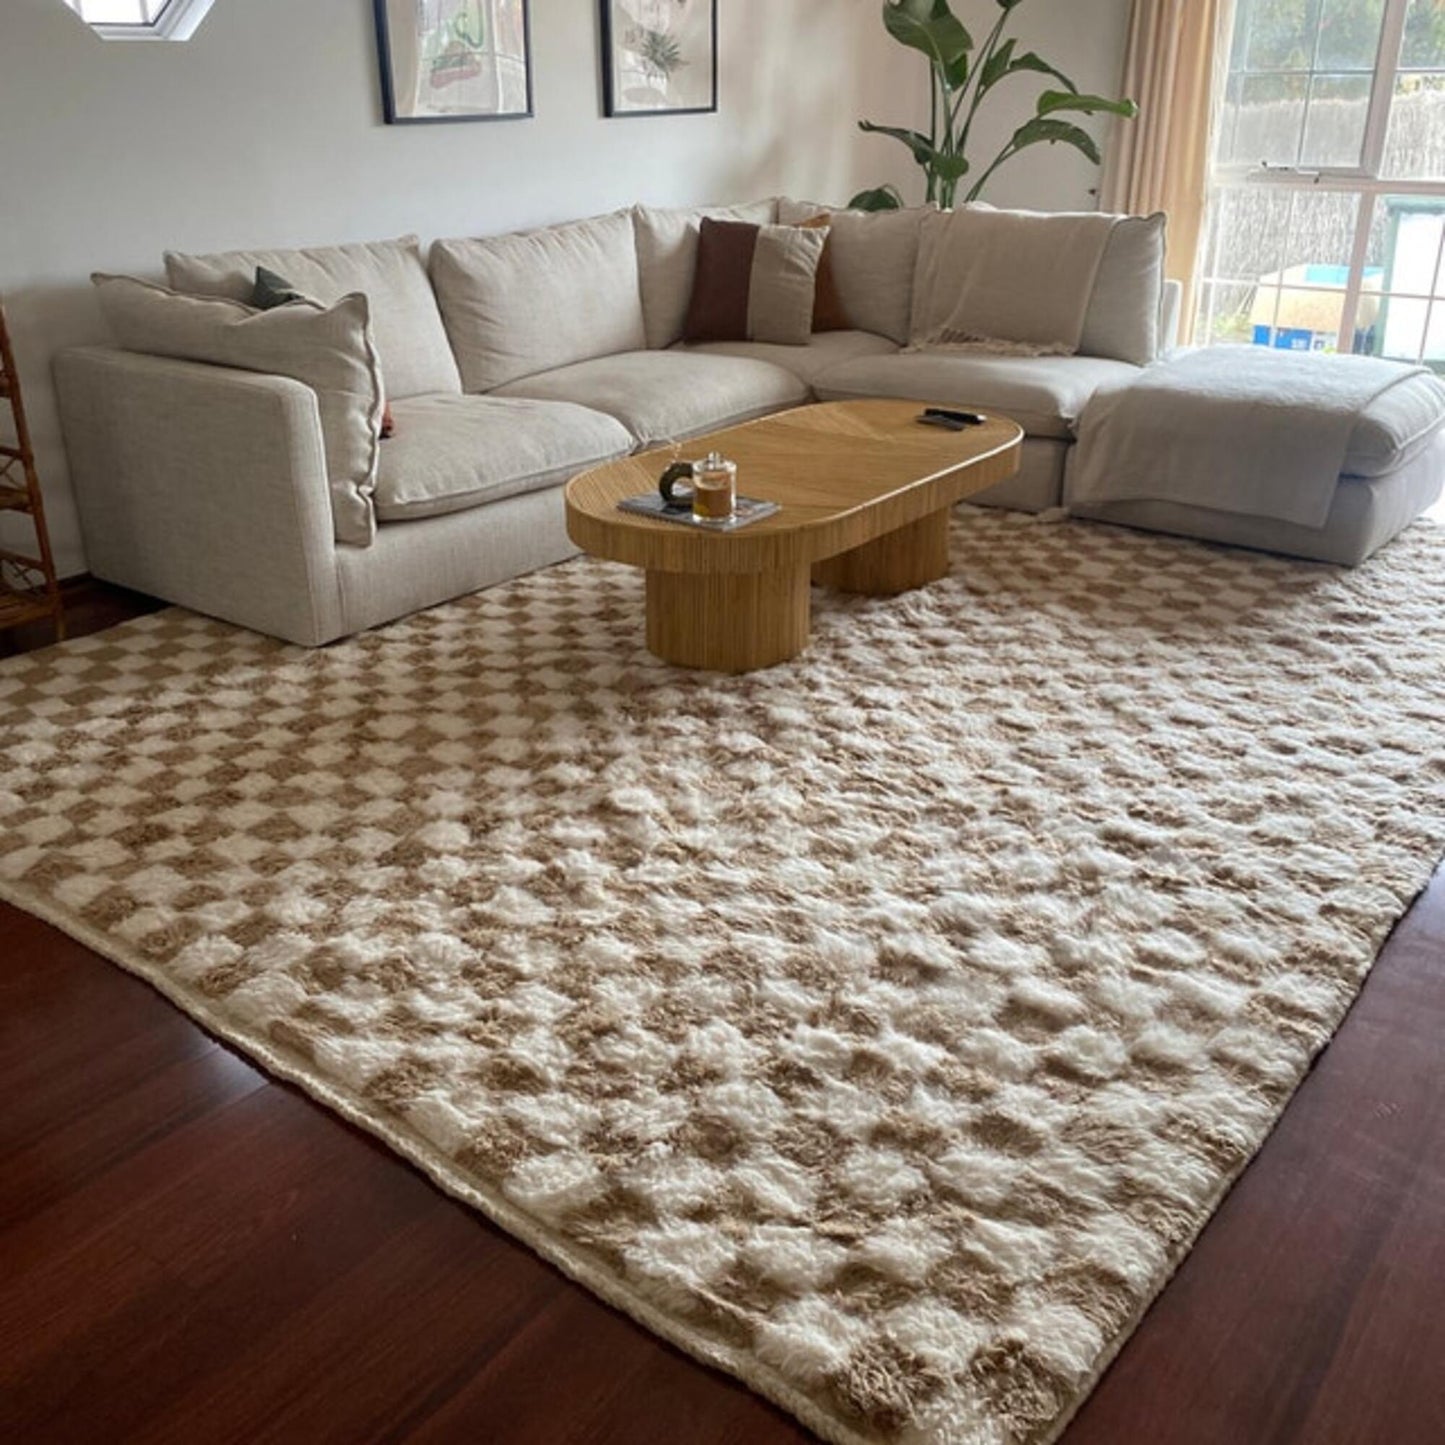 Moroccan-Beige-and-white-Checkered-Rug-in-large-living-room-area